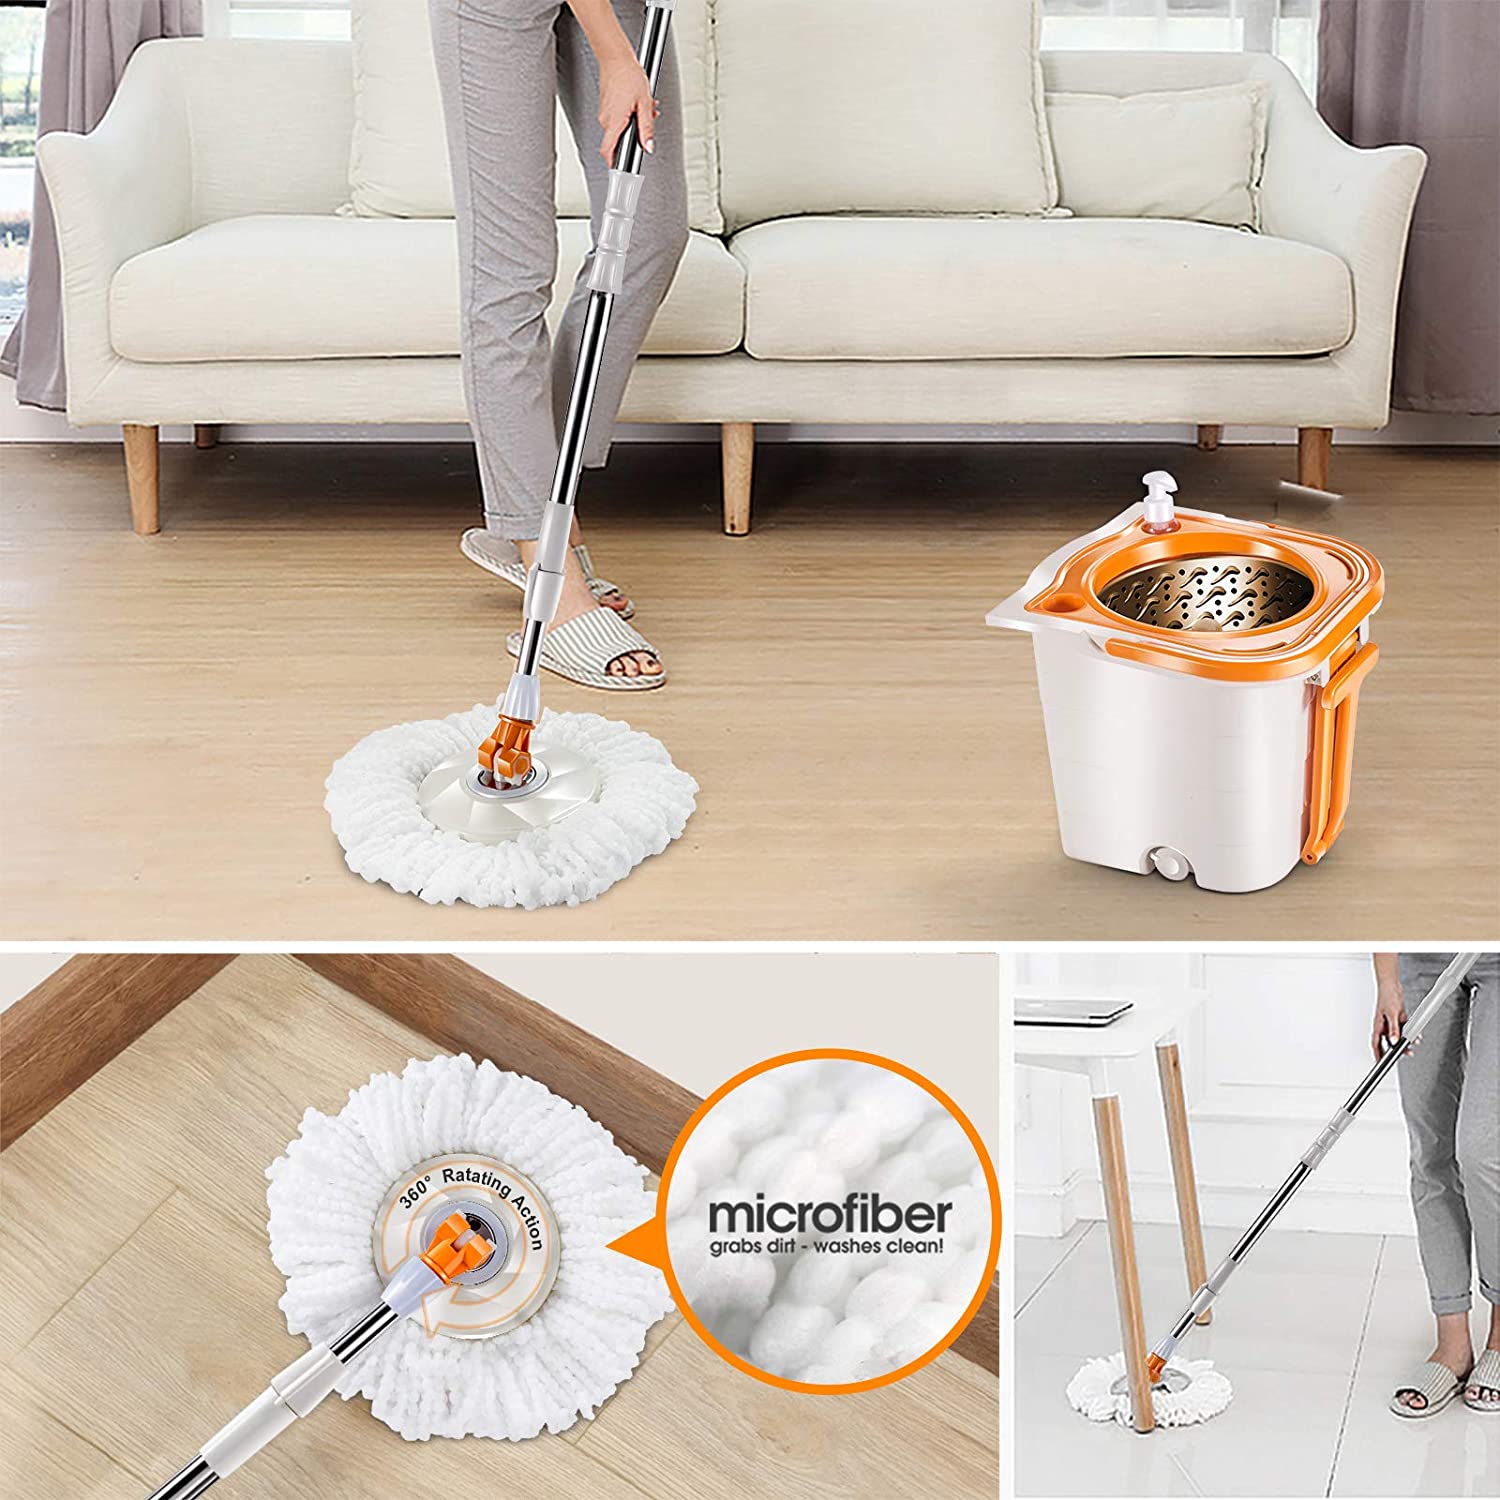 Spin Mop with Bucket, Mop and Bucket with Wringer Set, Floor Mop Bucket Set  360 Spin Mop System 3 Mop Heads for Floor Cleaning, Black & Red 